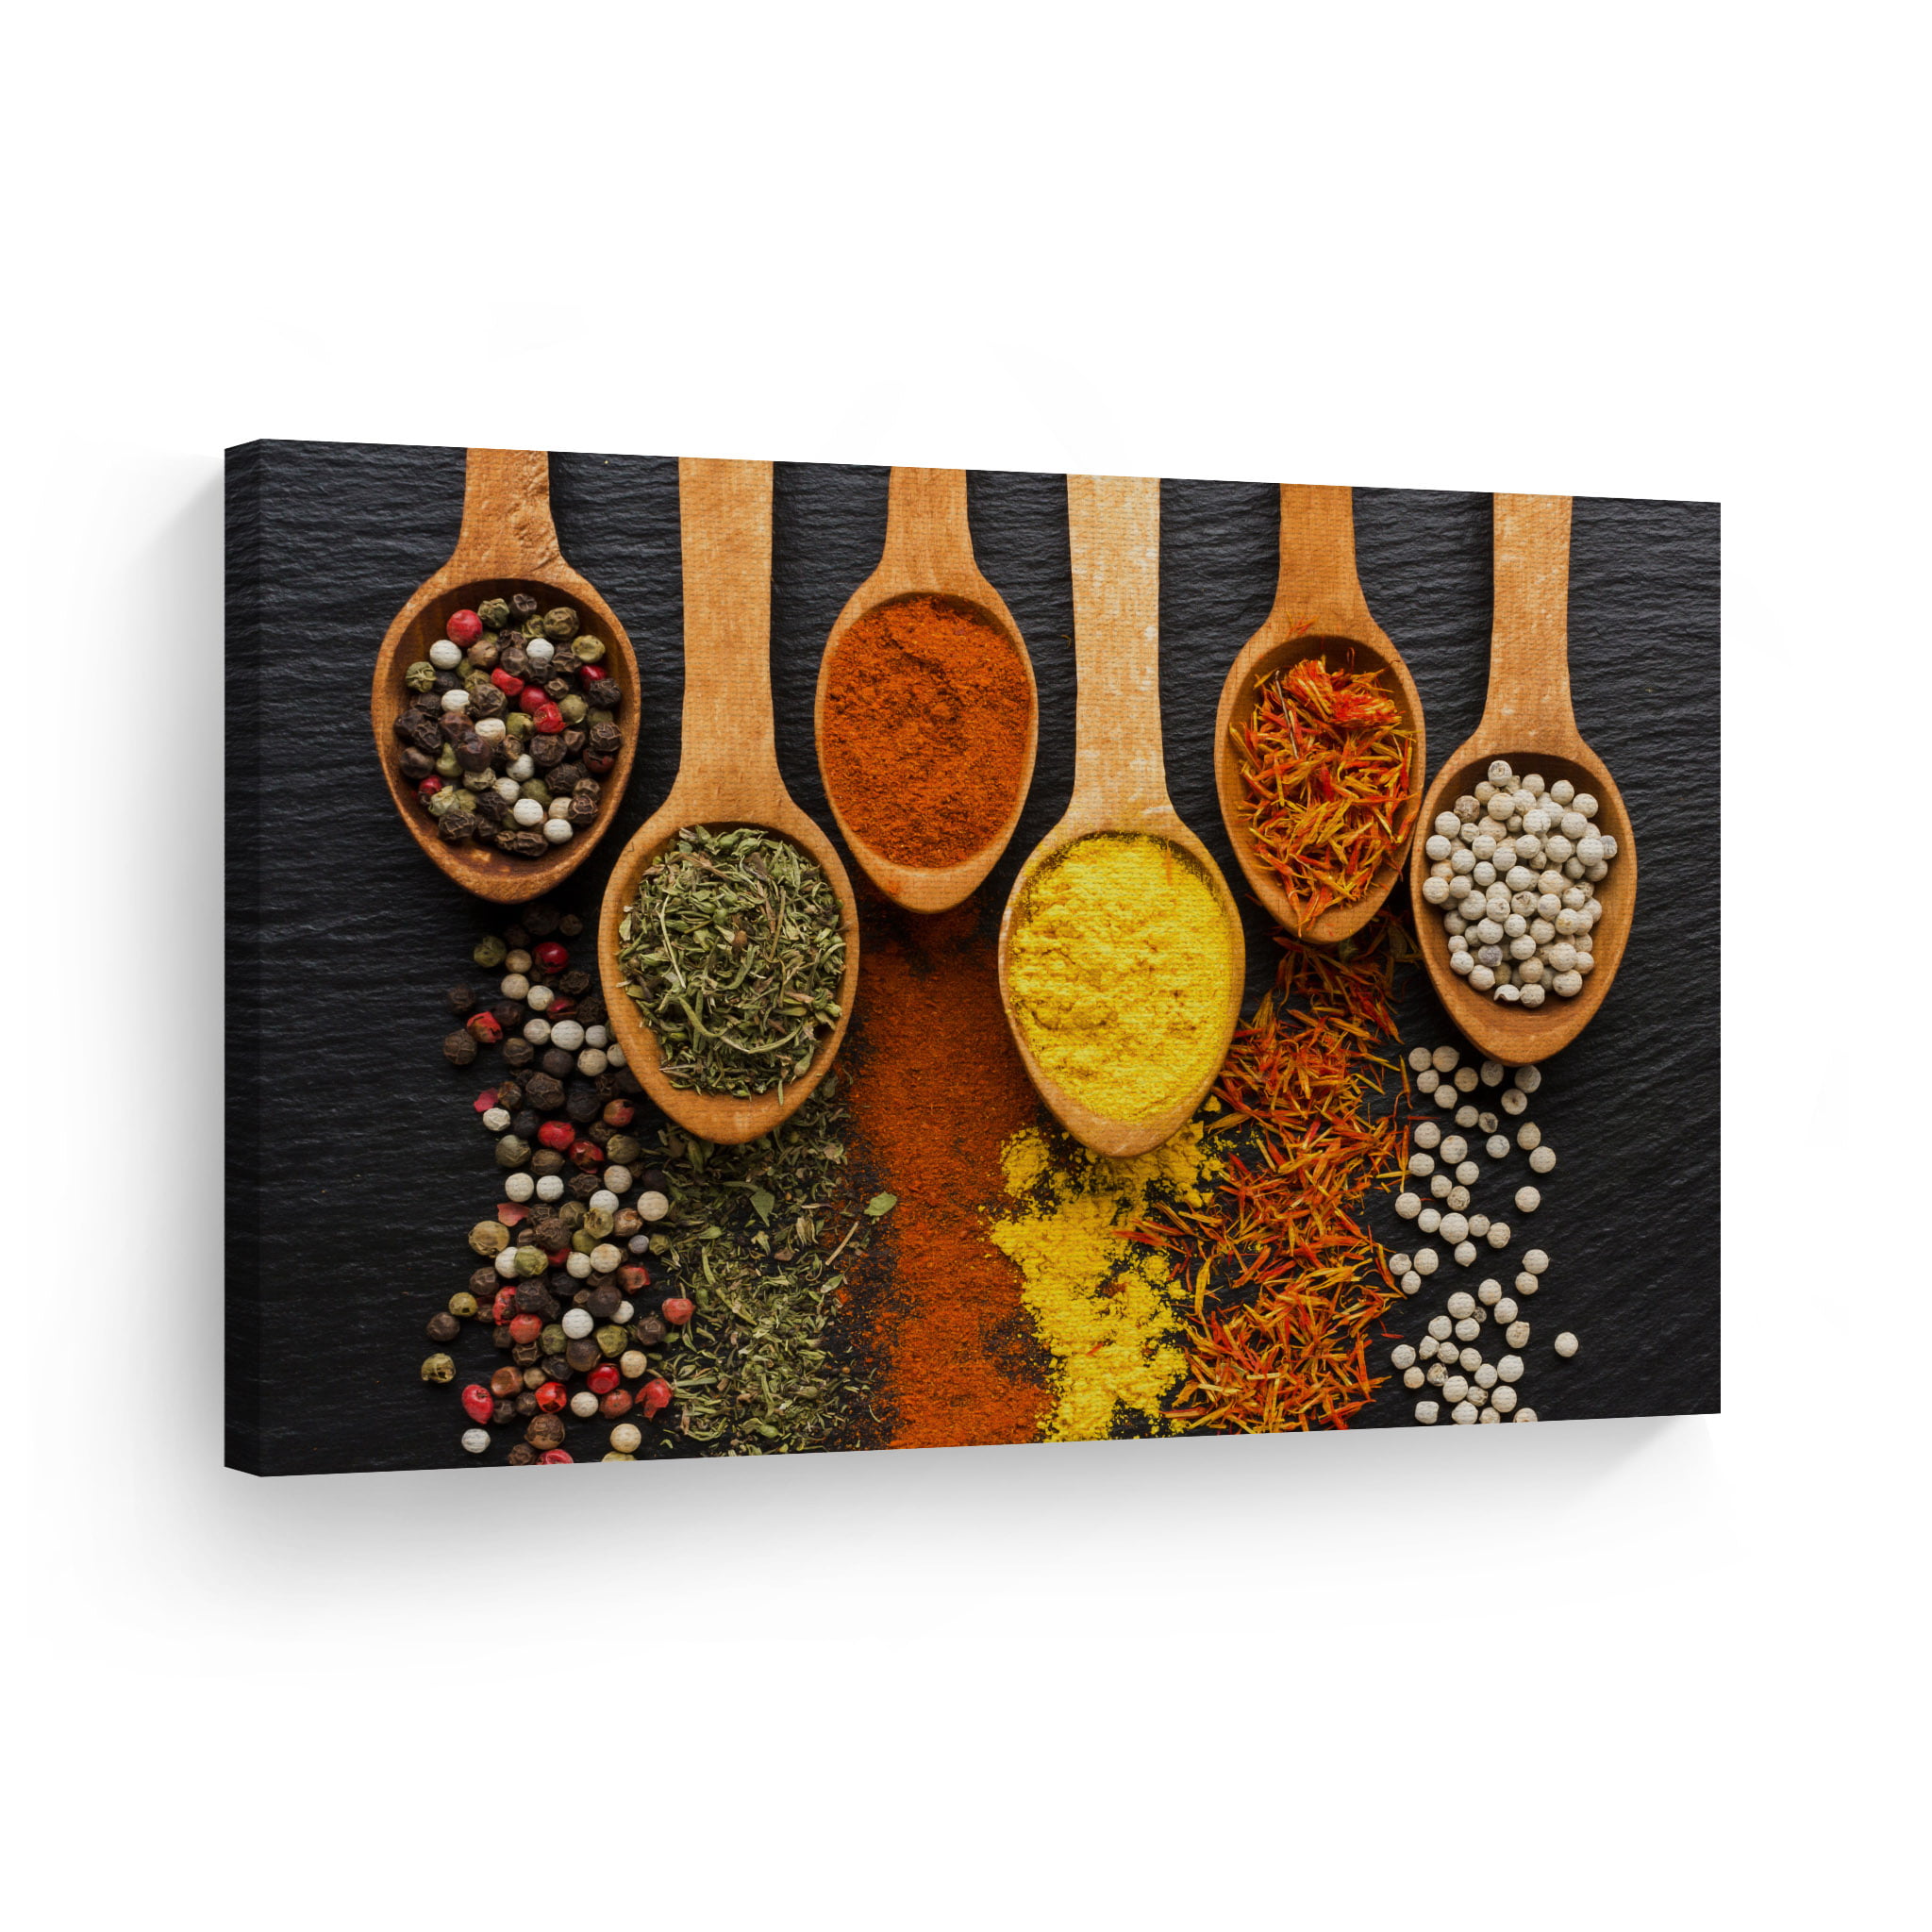 Spices Wooden Spoons Kitchen CANVAS WALL ART Picture Print